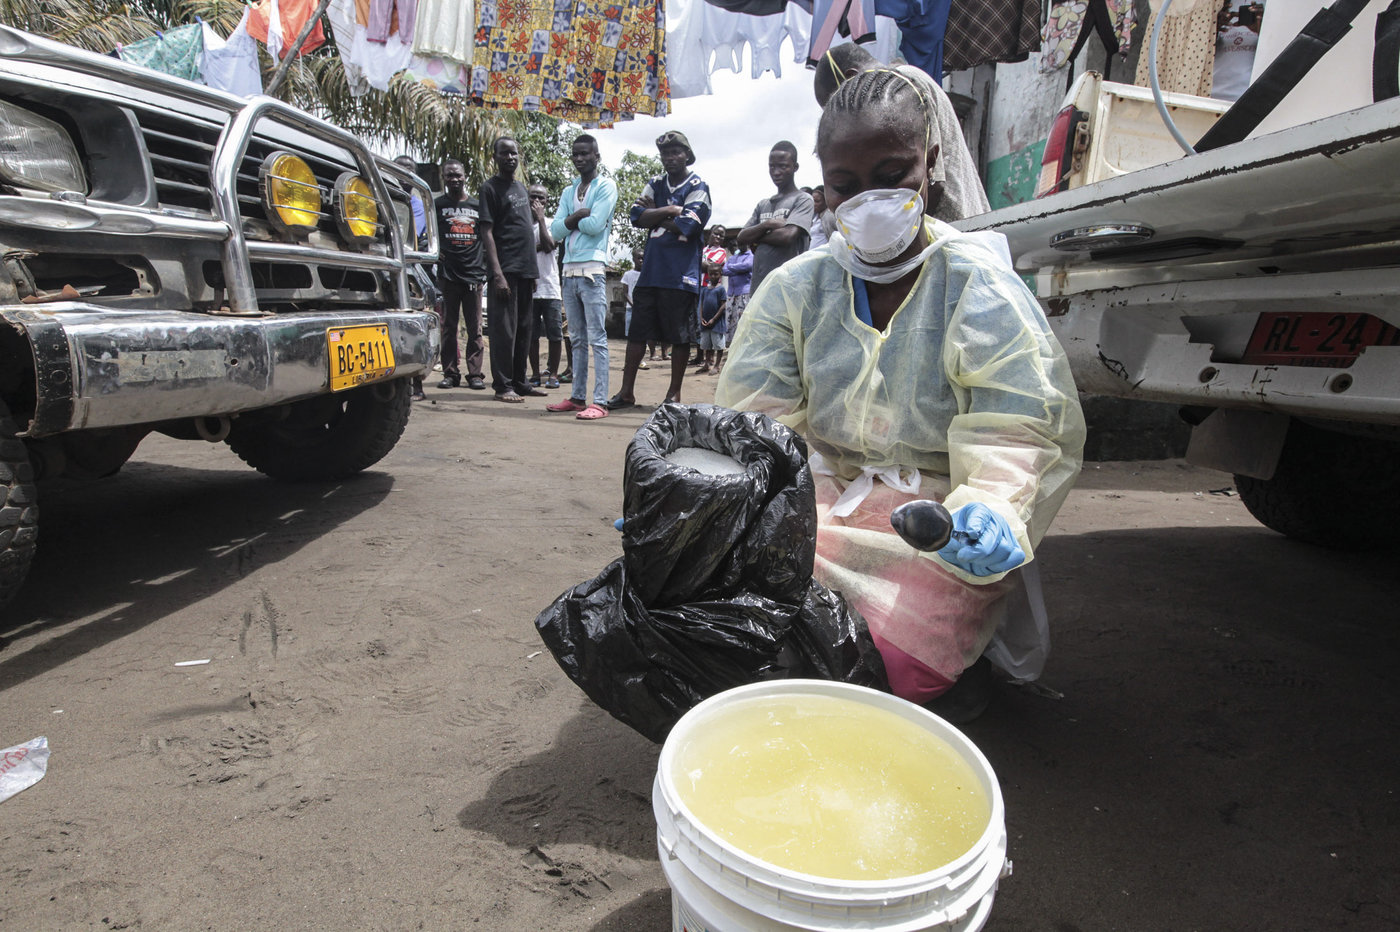 Garmai Sumo mixes chlorine with water to disinfect a residential area in Monrovia, Liberia, where a resident died of Ebola on Oct. 14, 2014.